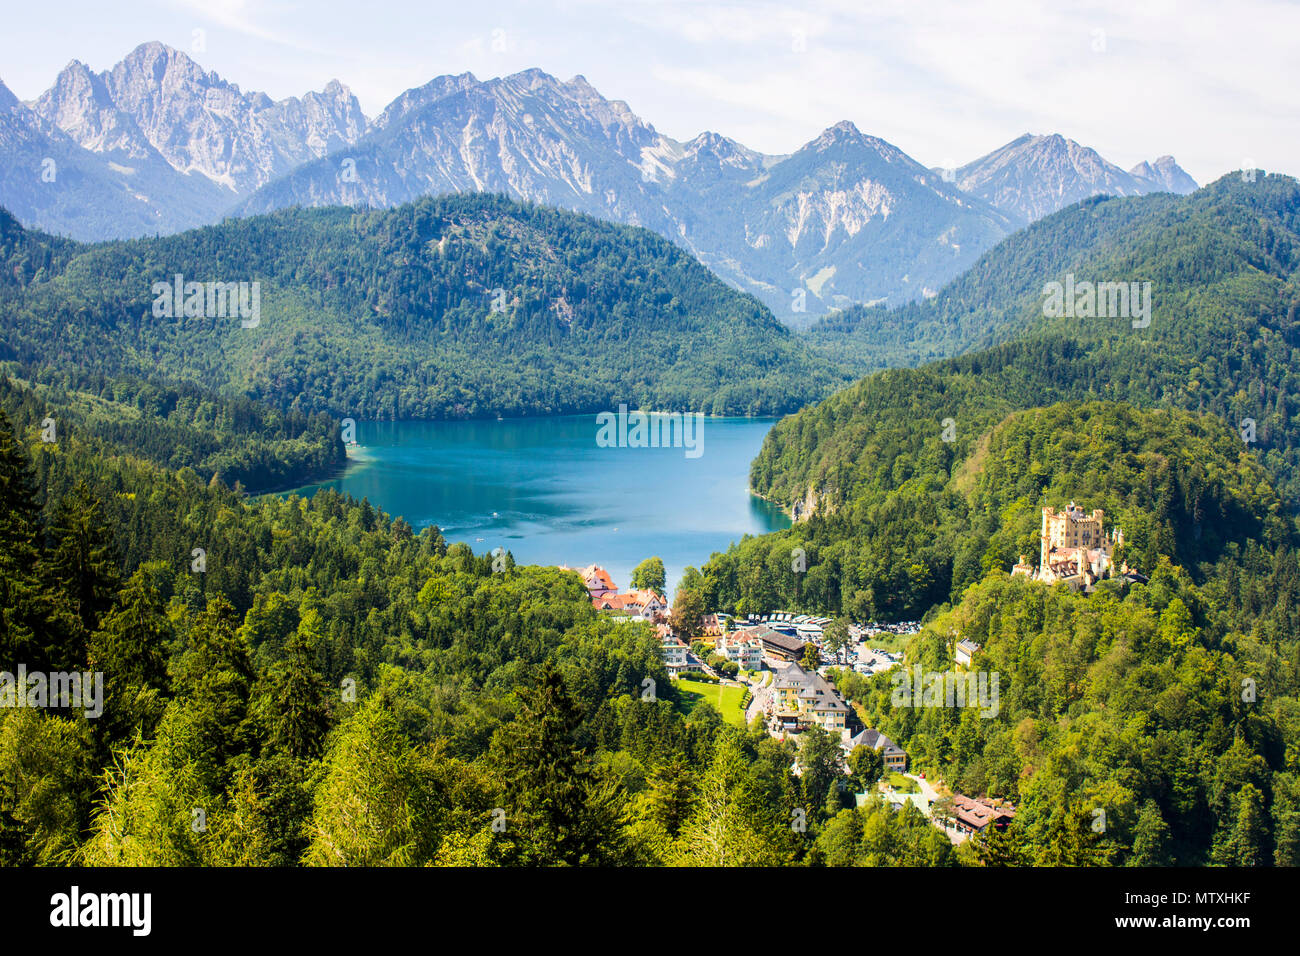 Views of Alpsee lake and Hohenschwangau, from Neuschwanstein castle, with Schloss Hohenschwangau visible in the lower right, Germany Stock Photo